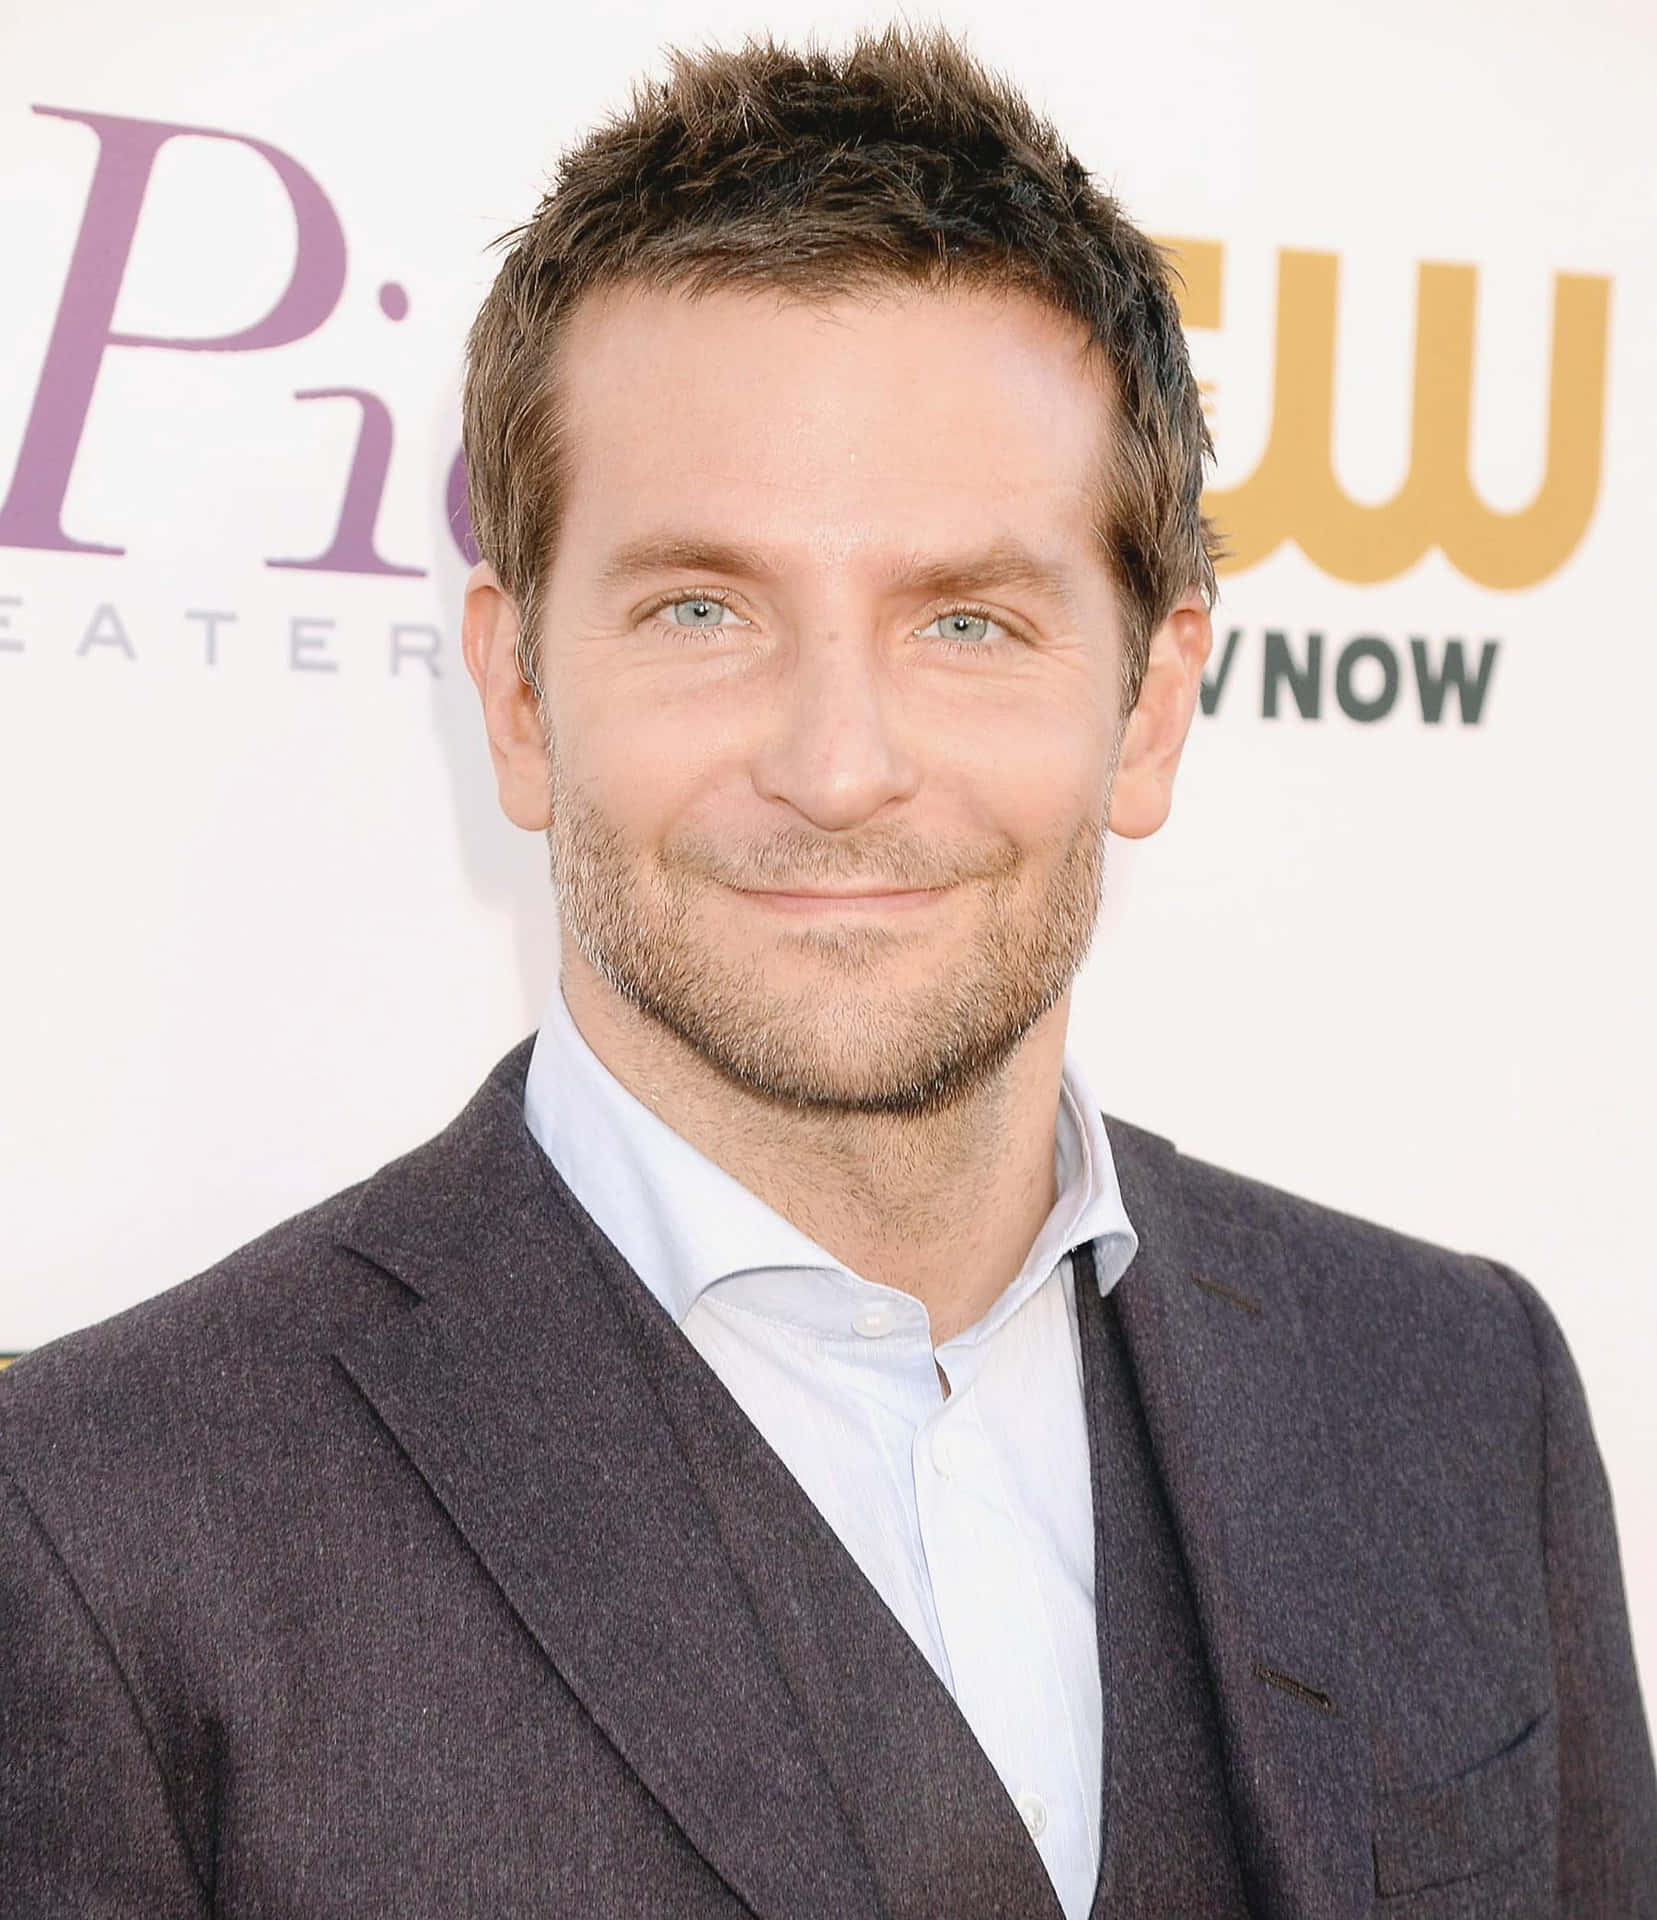 Bradley Cooper, American Actor, Producer and Director